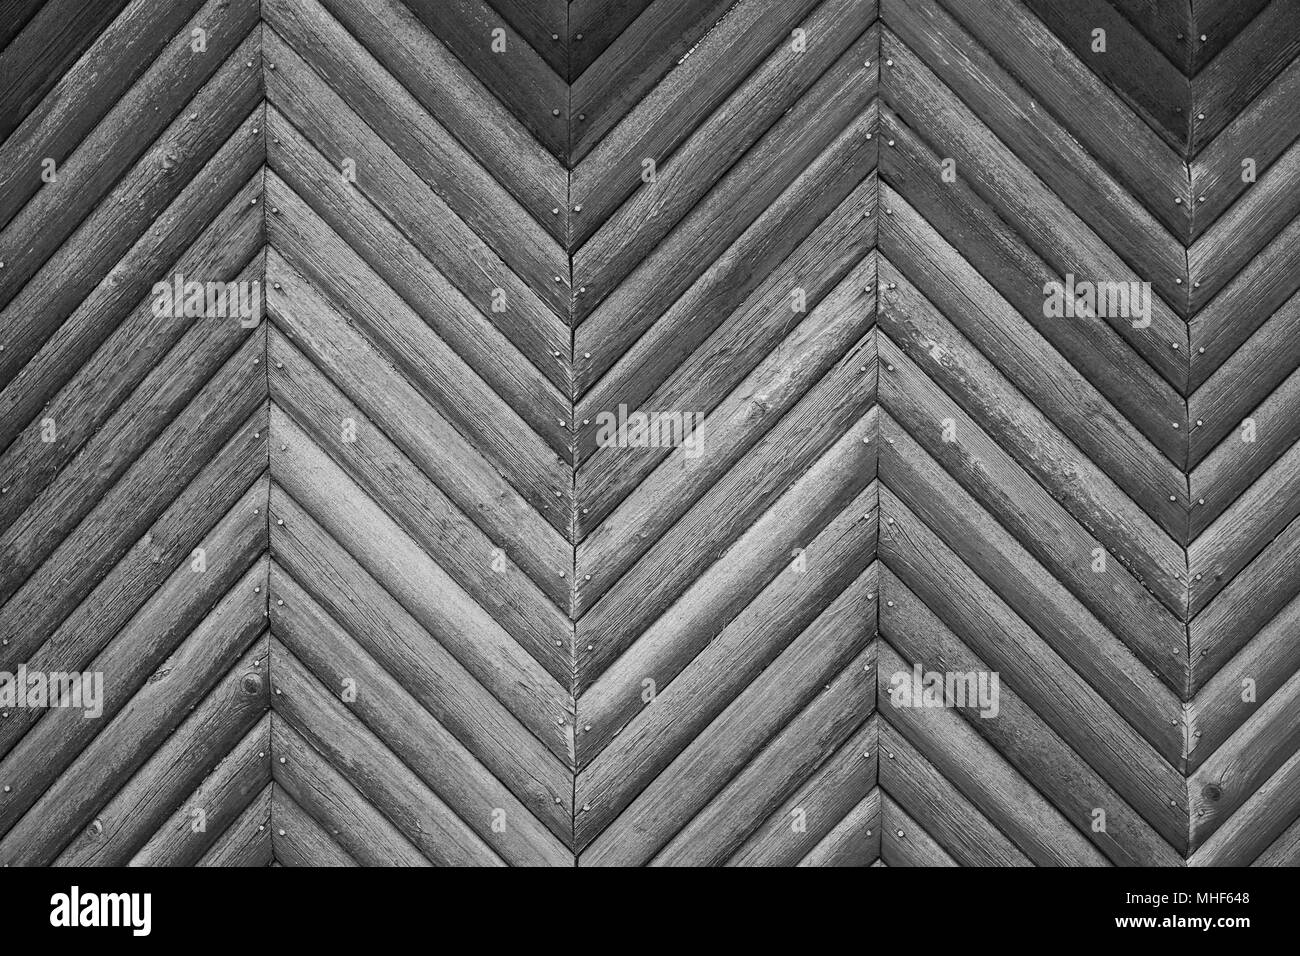 Old vintage black and white wooden texture background Stock Photo